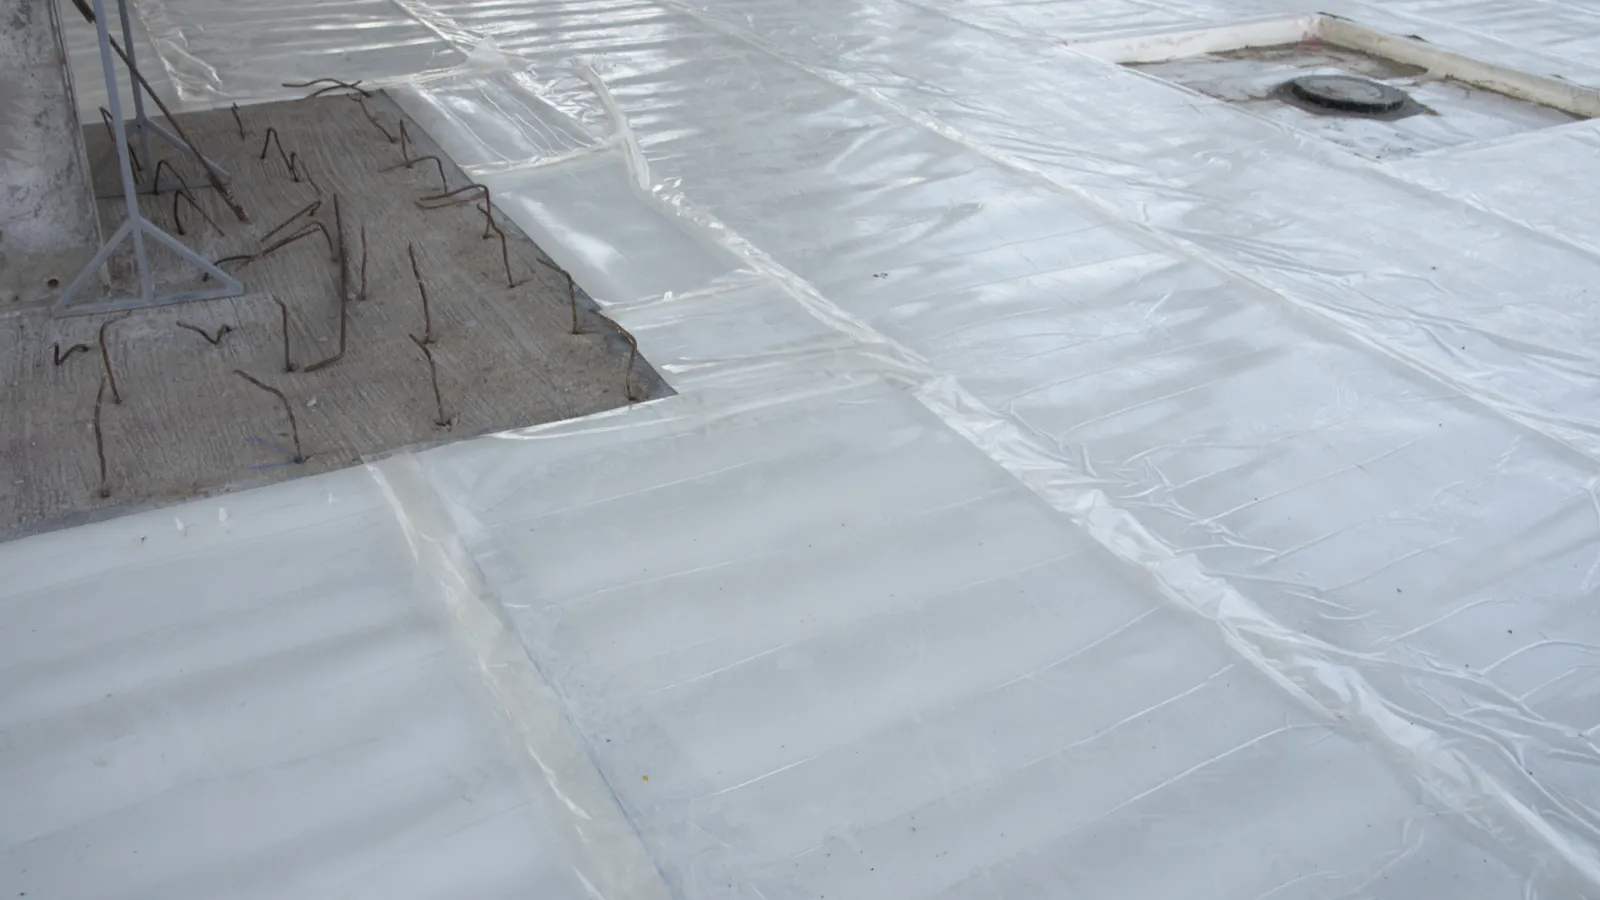 A close up of a singly-ply membrane roofing system